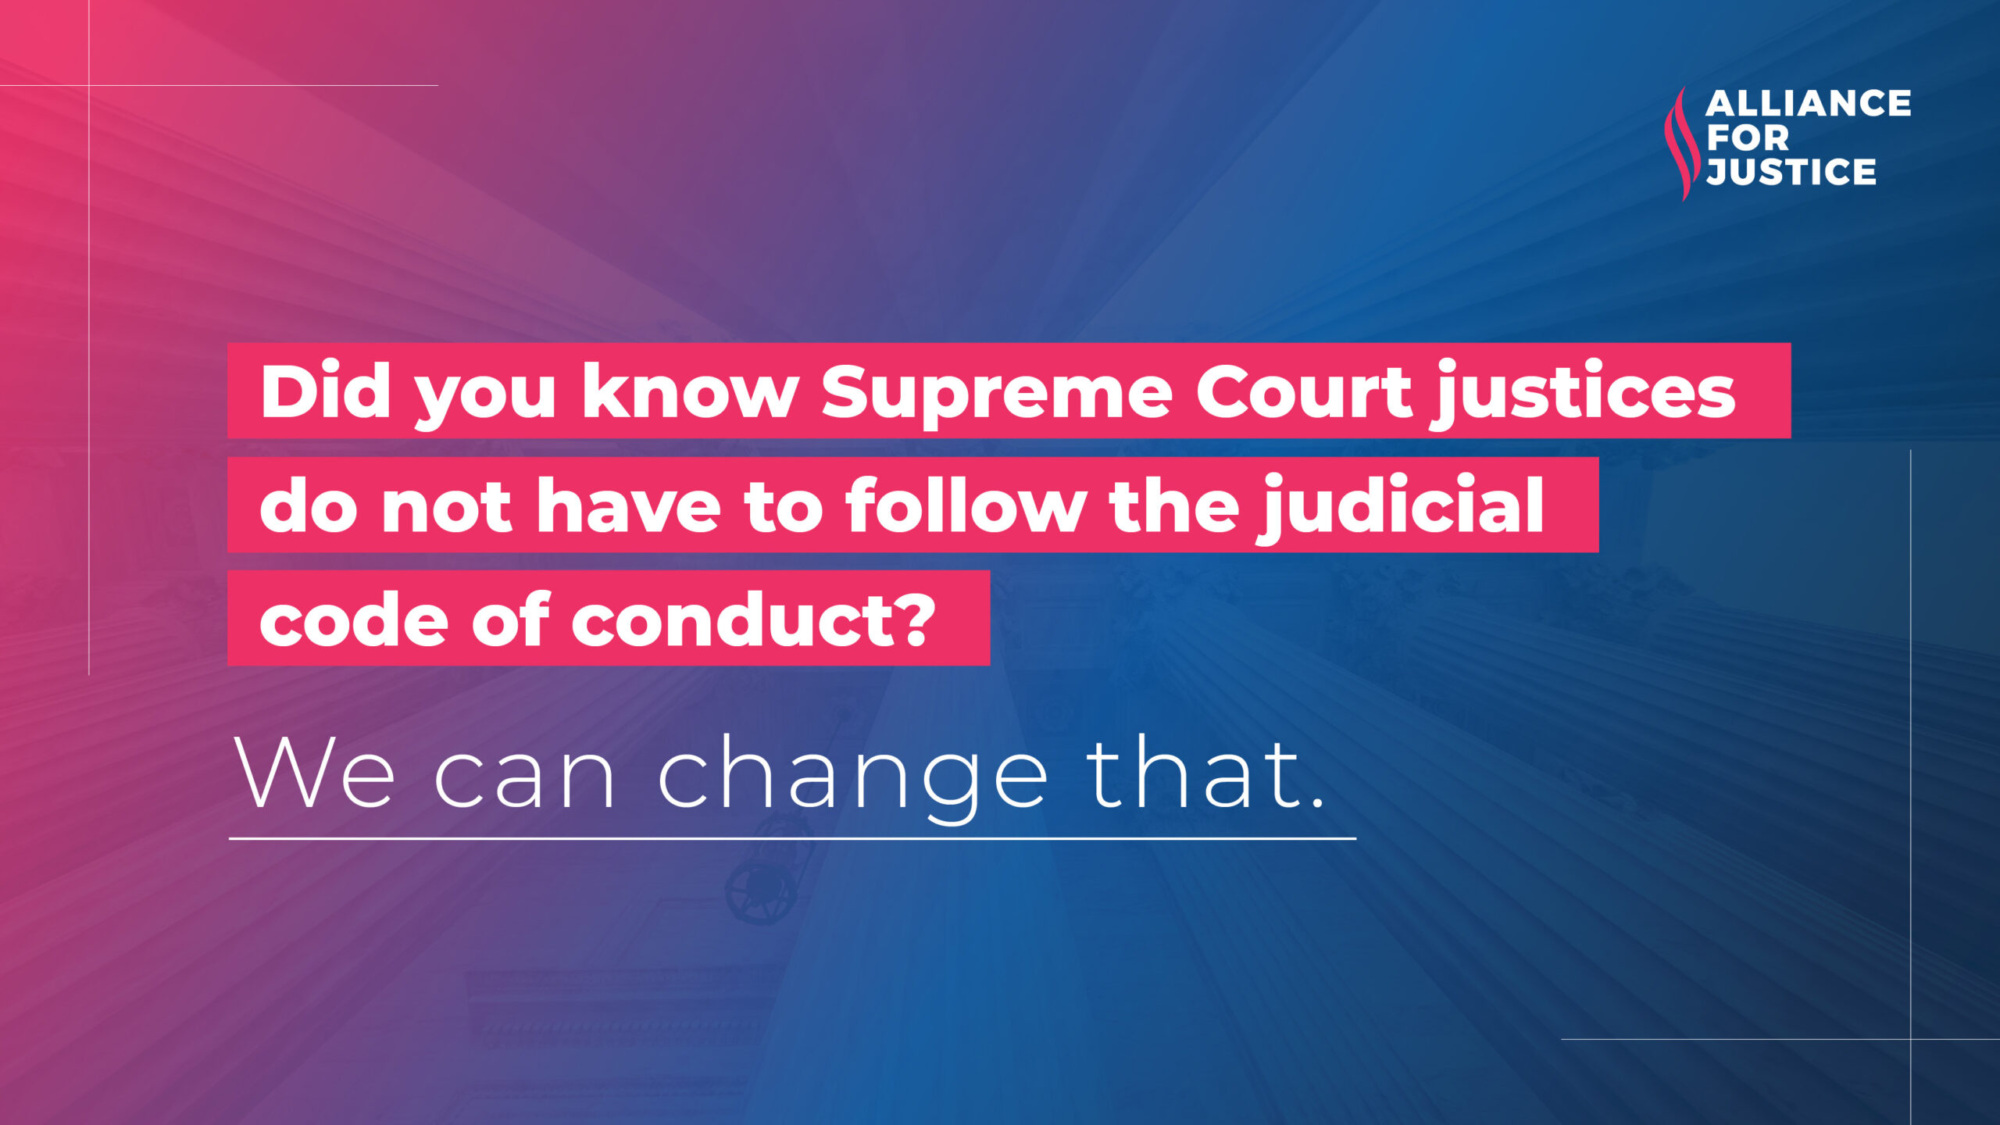 Red-and-blue AFJ-logo-branded graphic reading "Did you know Supreme Court Justices do not have to follow the judicial code of conduct? We can change that."